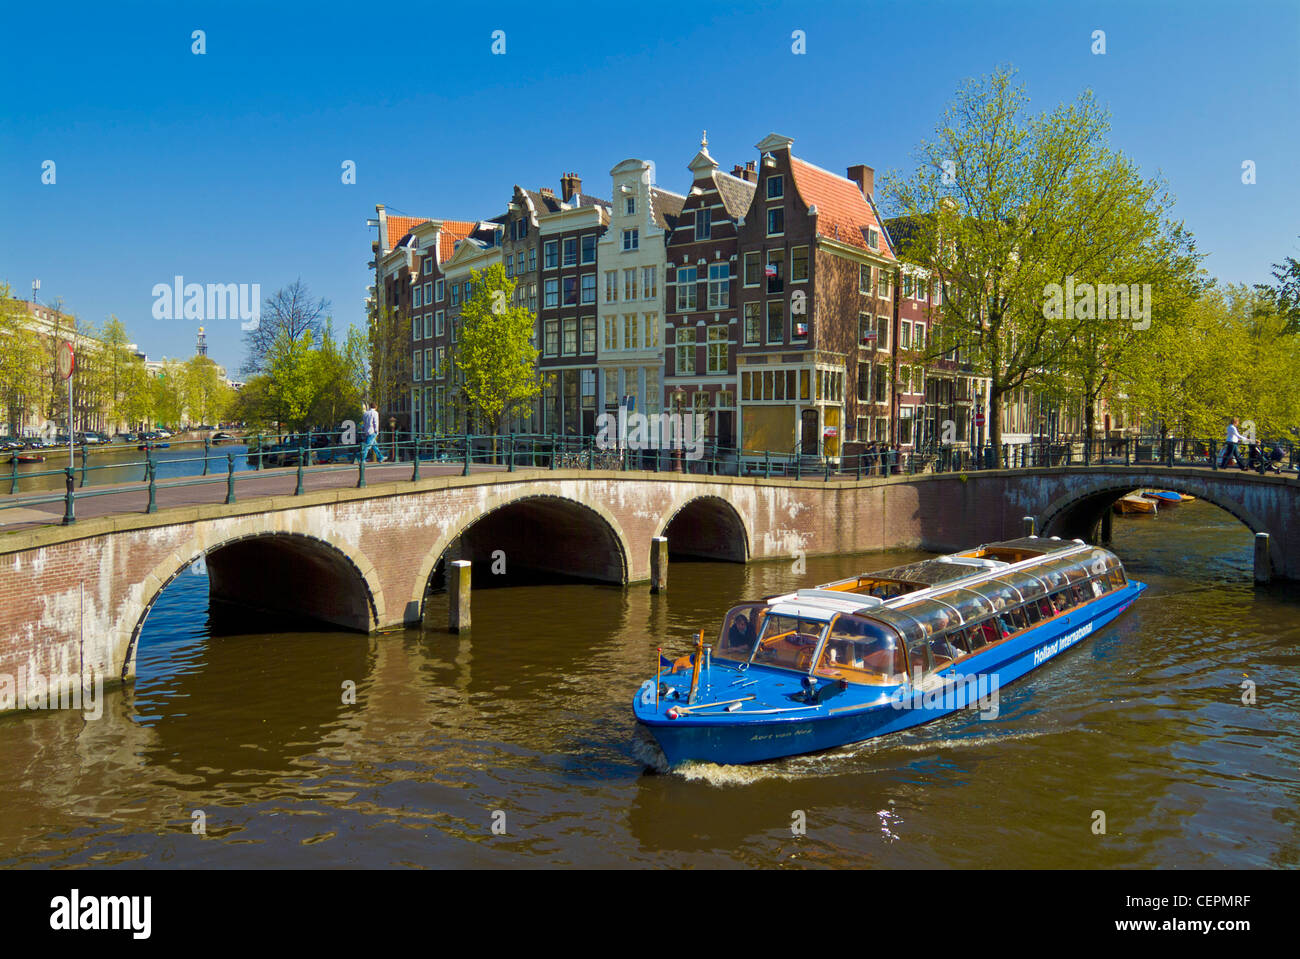 Cruise boat on the Keizersgracht canal in central Amsterdam Holland Netherlands EU Europe Stock Photo